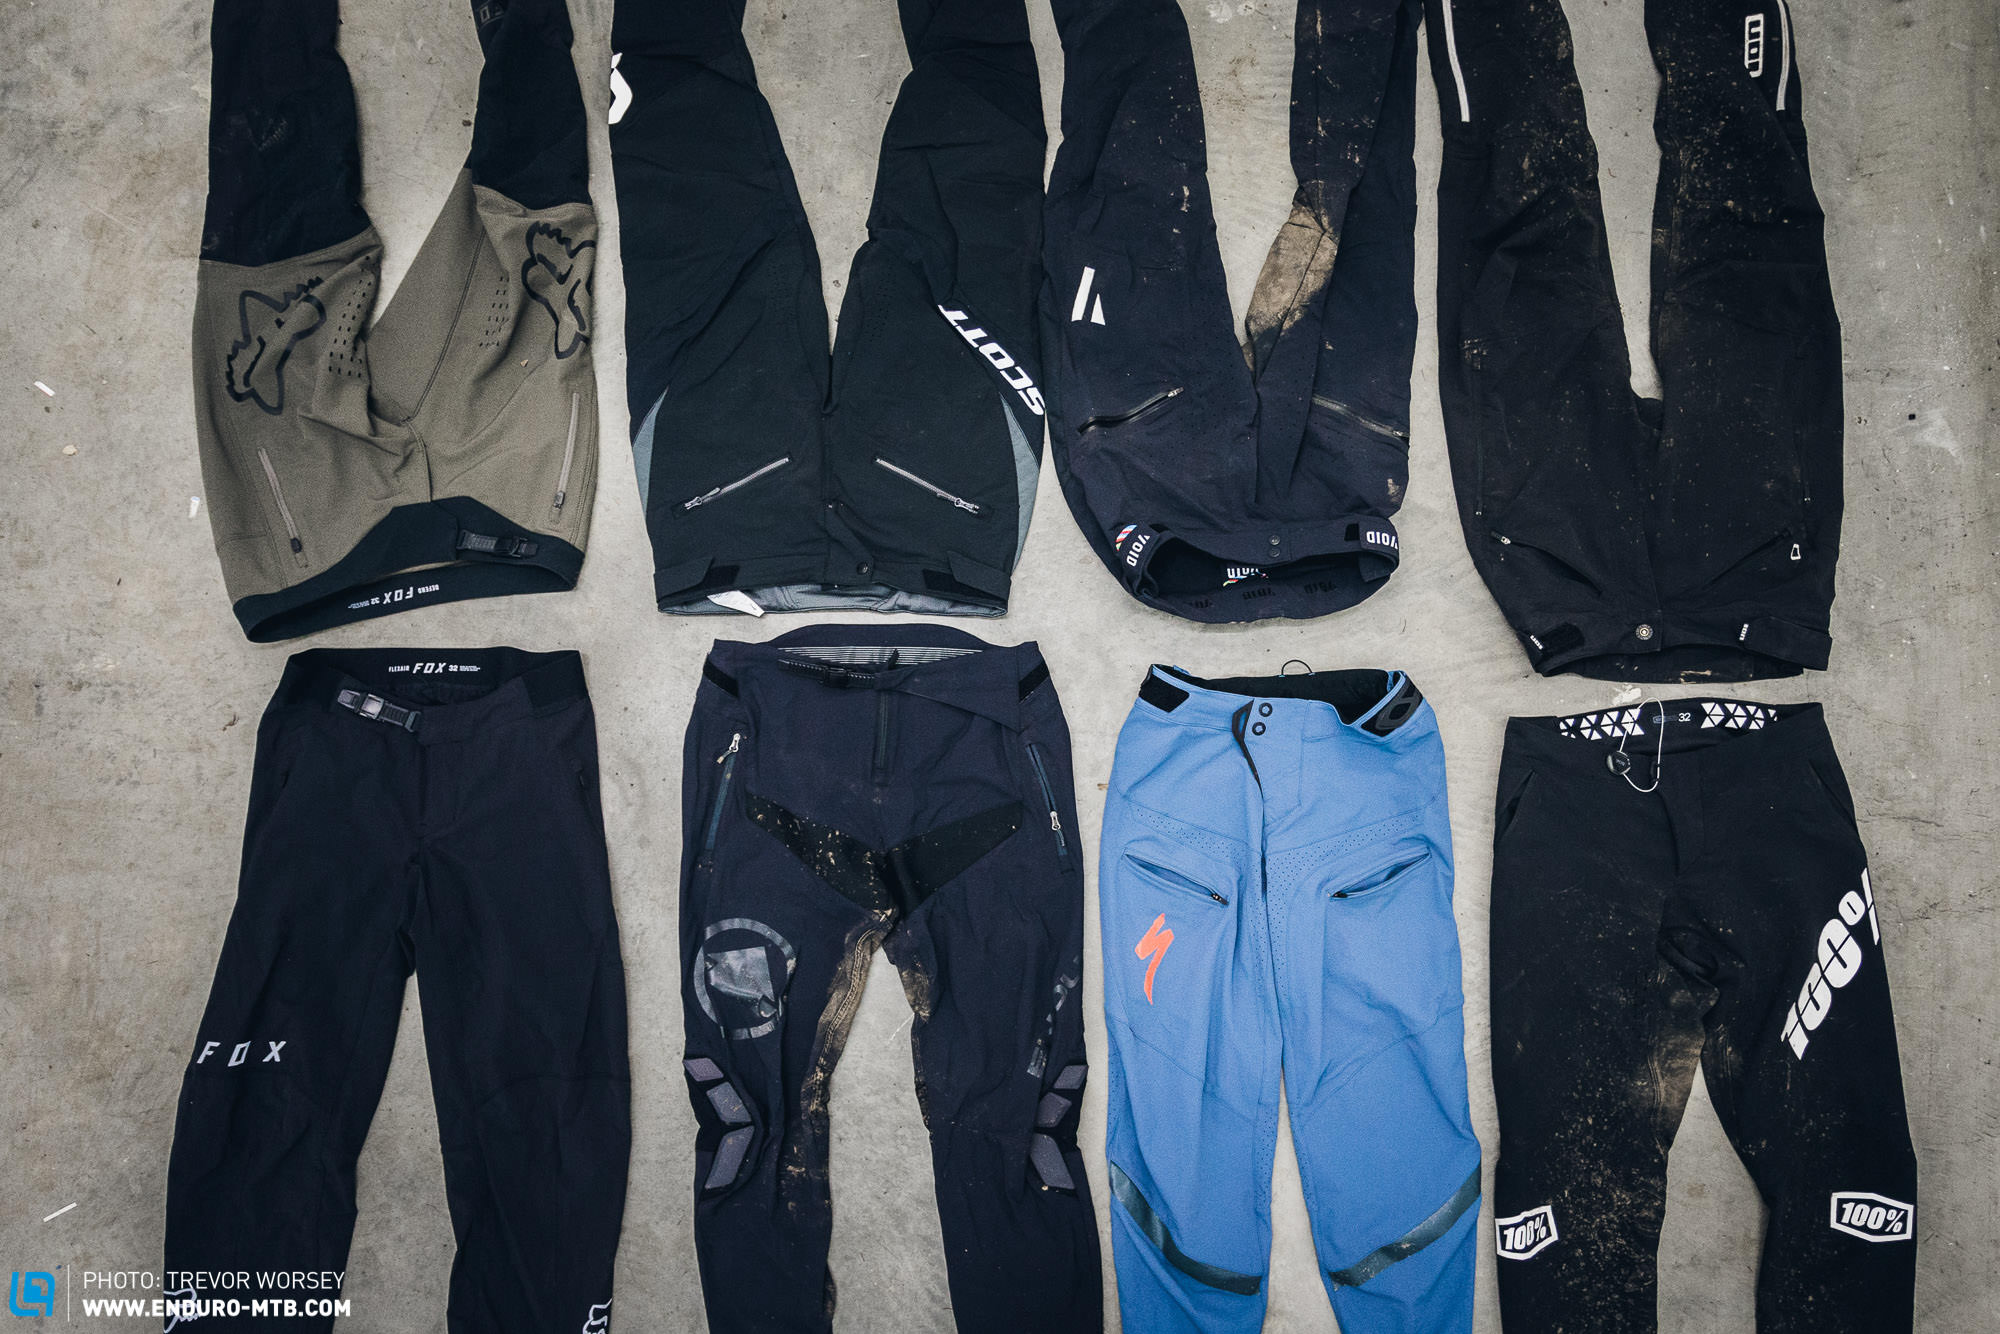 Understanding Different Types Of Motorcycle Pants – Eagle Leather